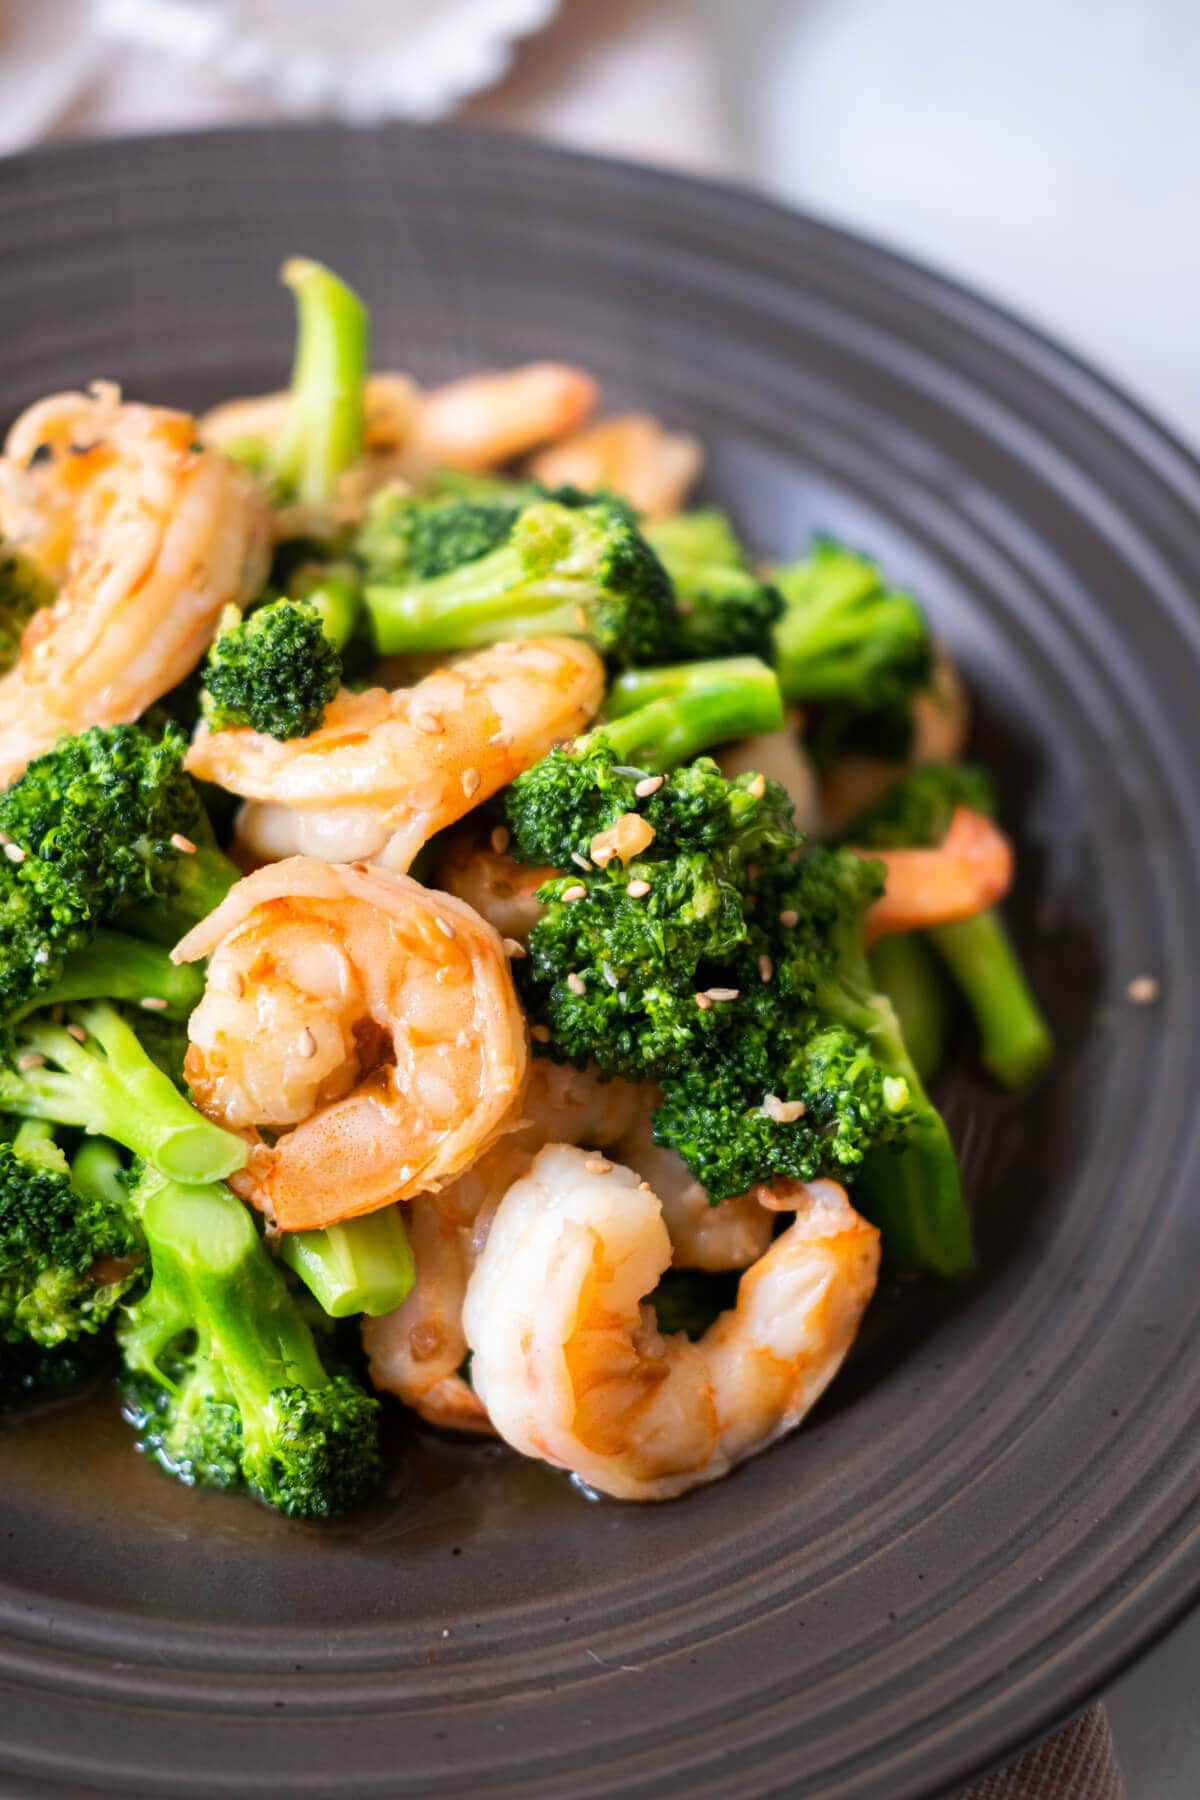 Healthy shirmp and broccoli stir-fry served hot with white sesame seeds on top and a napkin placed behind it.